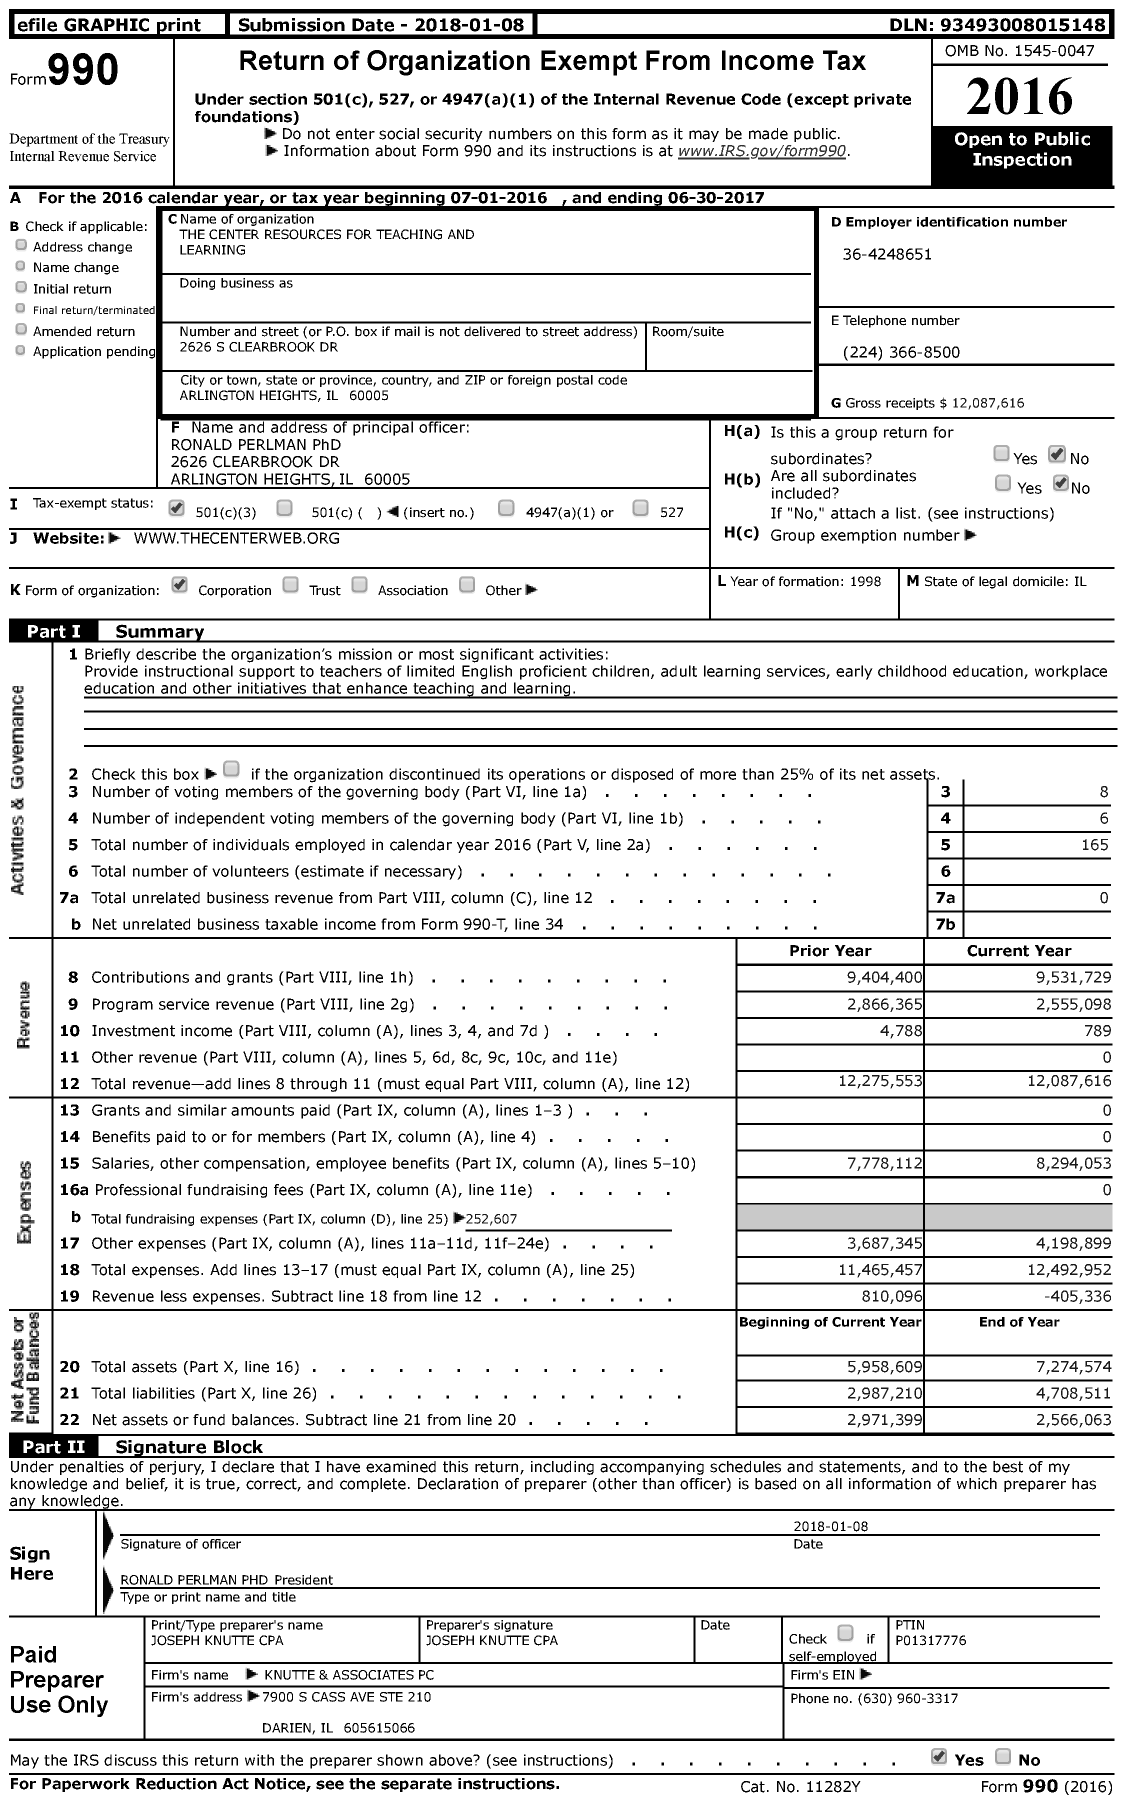 Image of first page of 2016 Form 990 for The Center Resources for Teaching and Learning